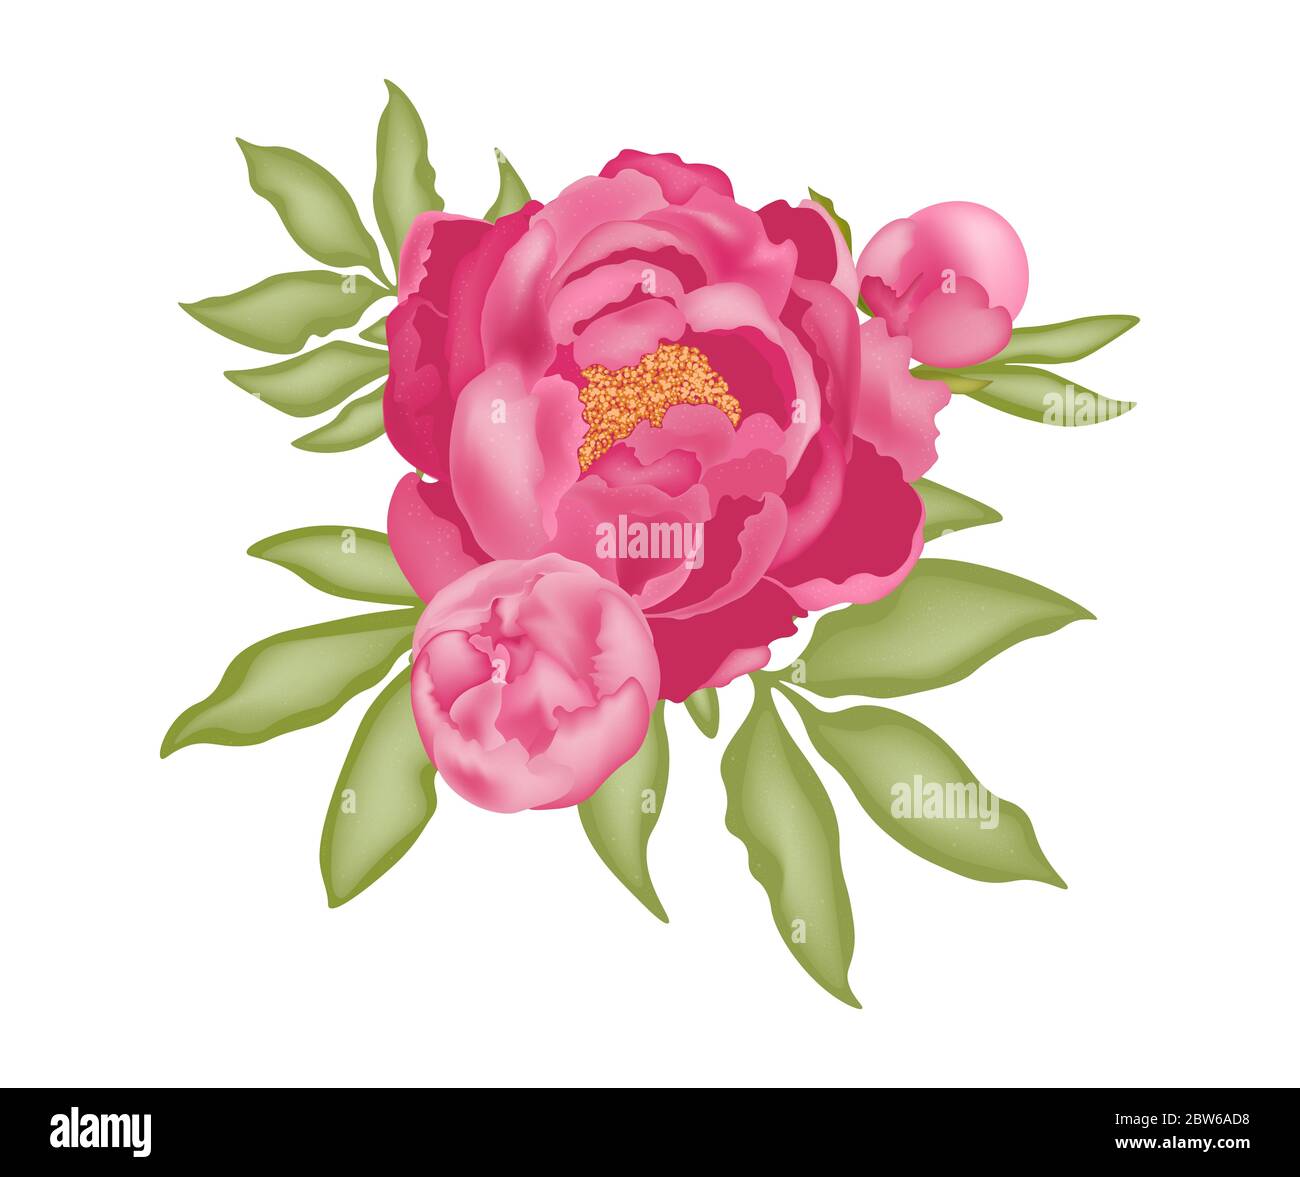 Pink peony with buds and green leaves, isolated on white background, stock vector illustration with 3D effect. For design and decoration, logo, print, Stock Photo